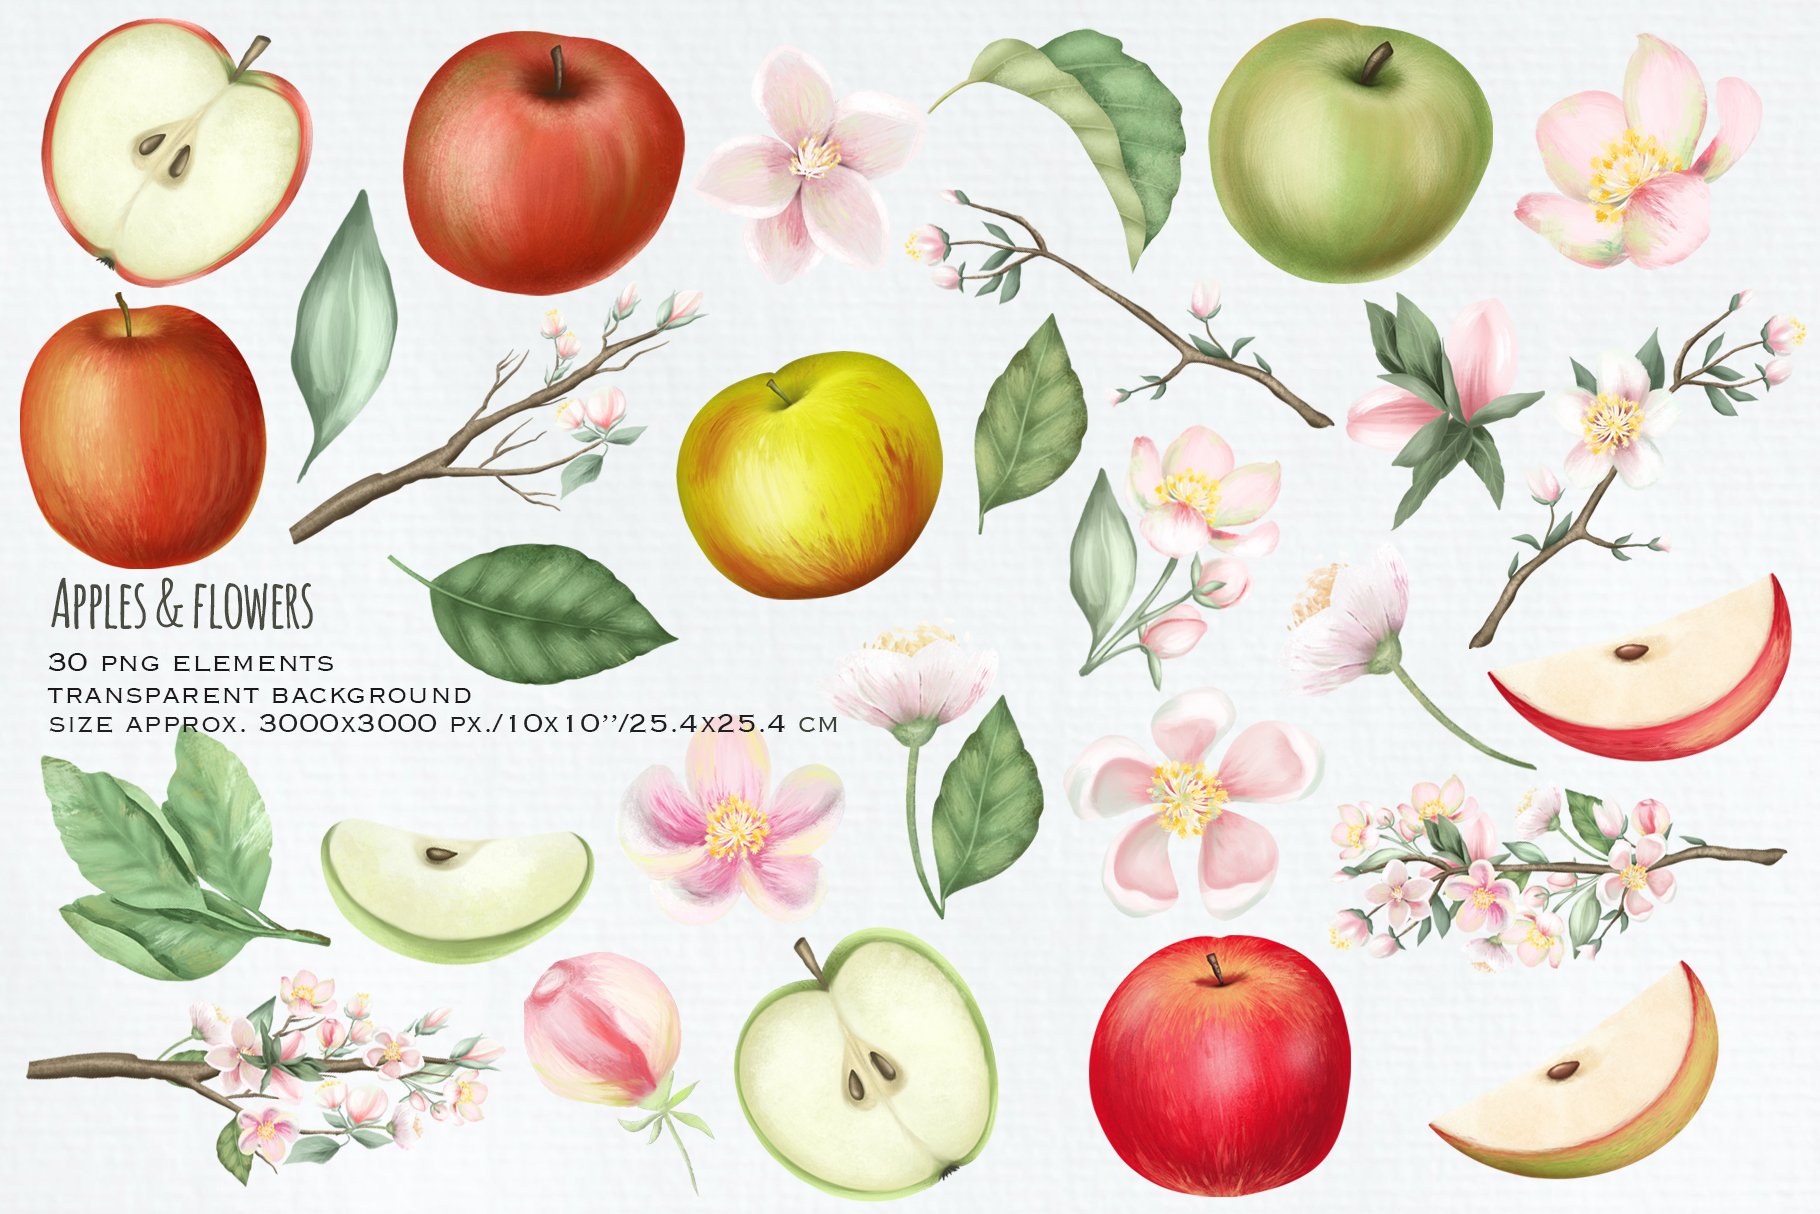 Realistic apple in different colors.